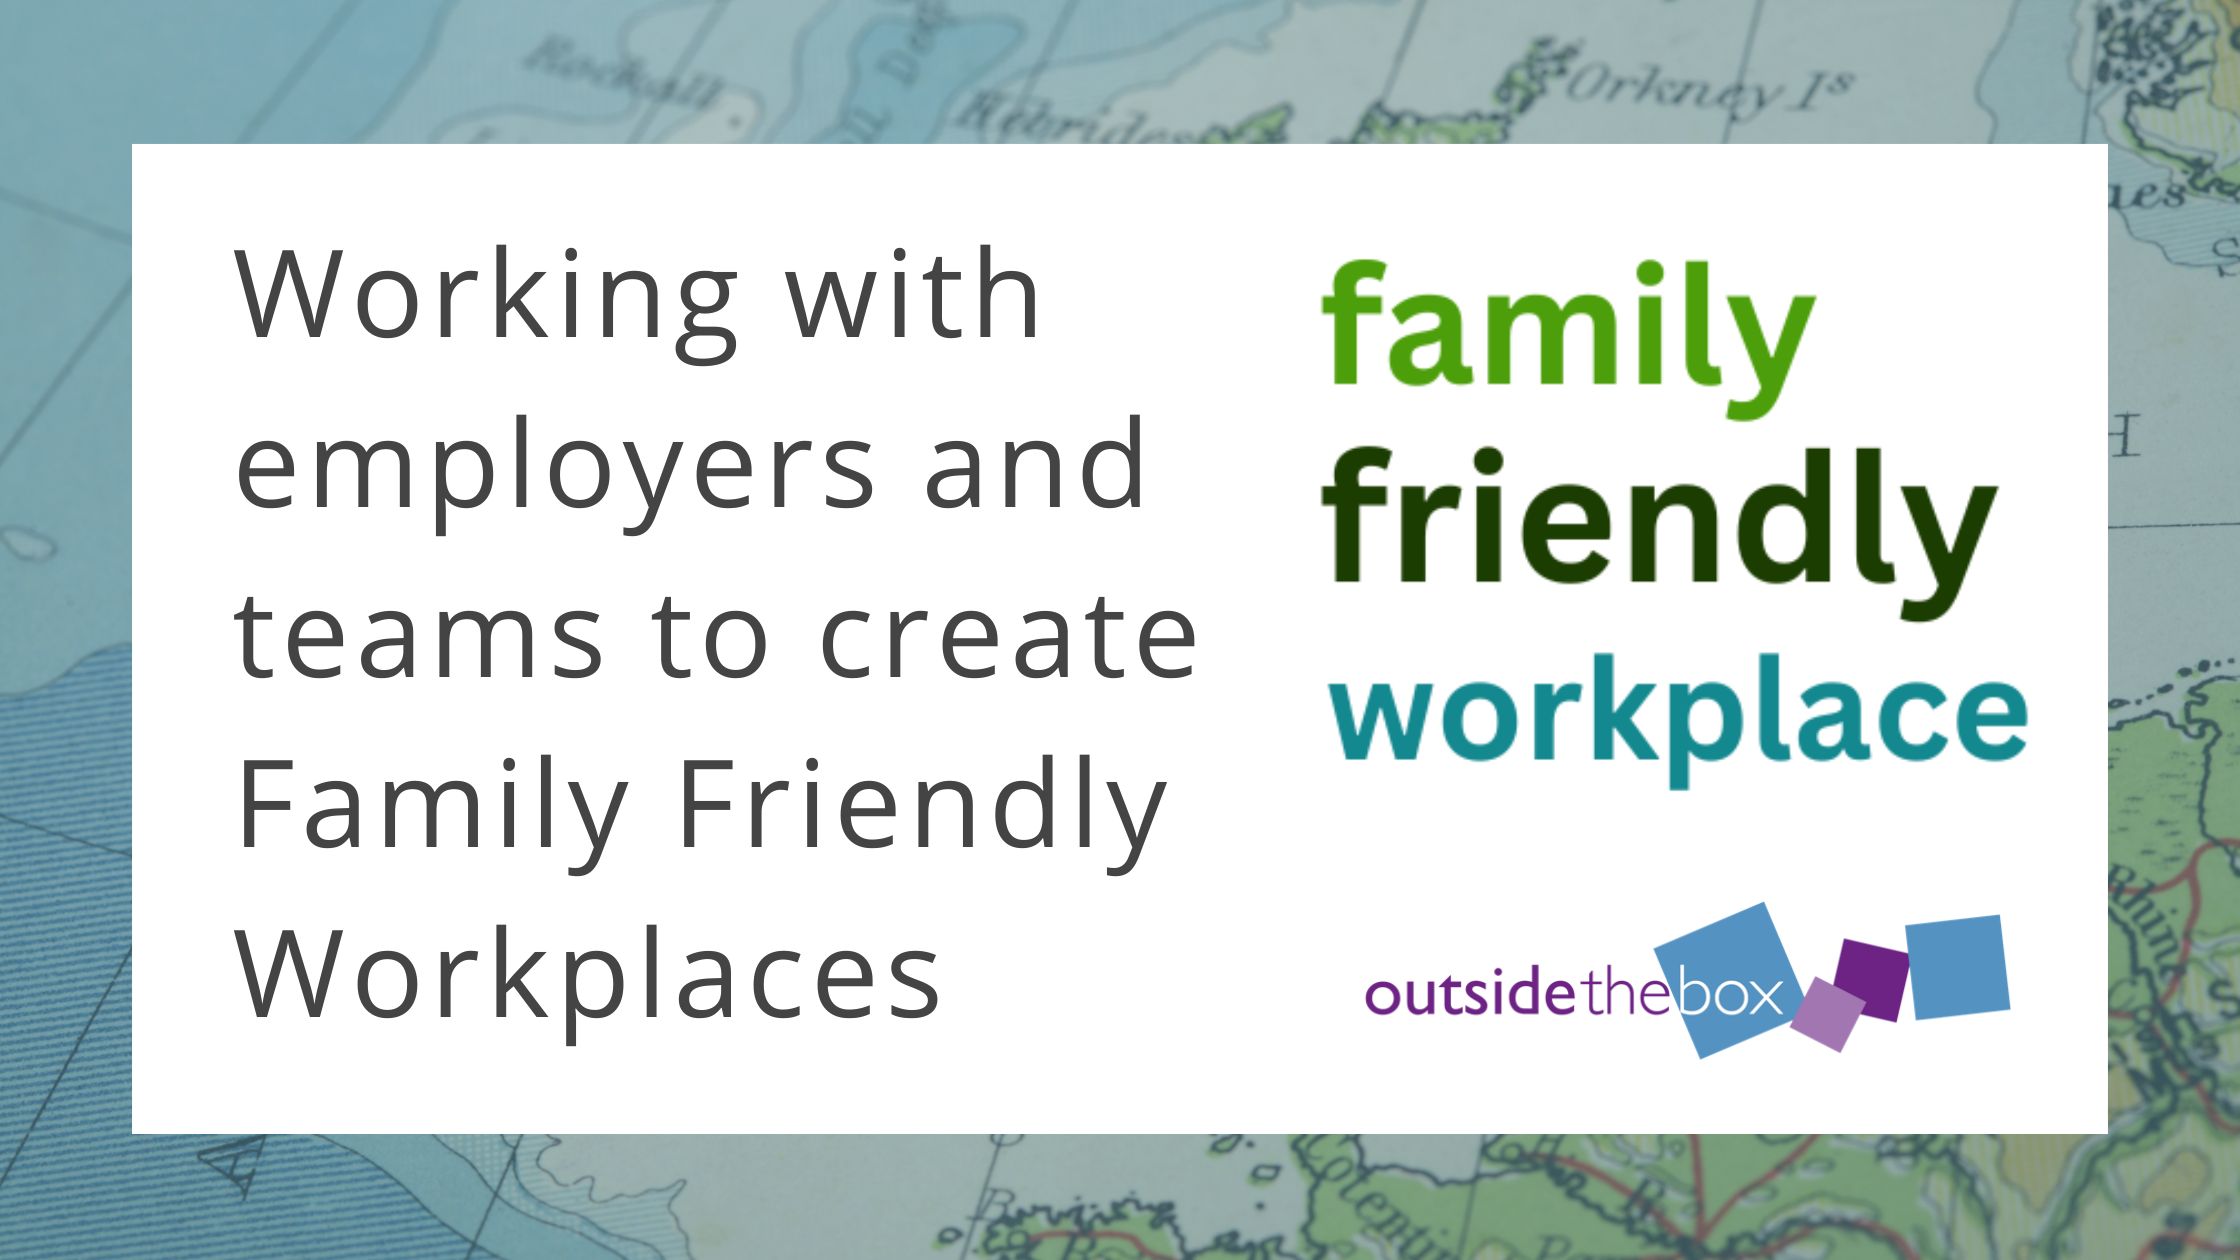 Working with employers and teams to create Family Friendly Workplaces